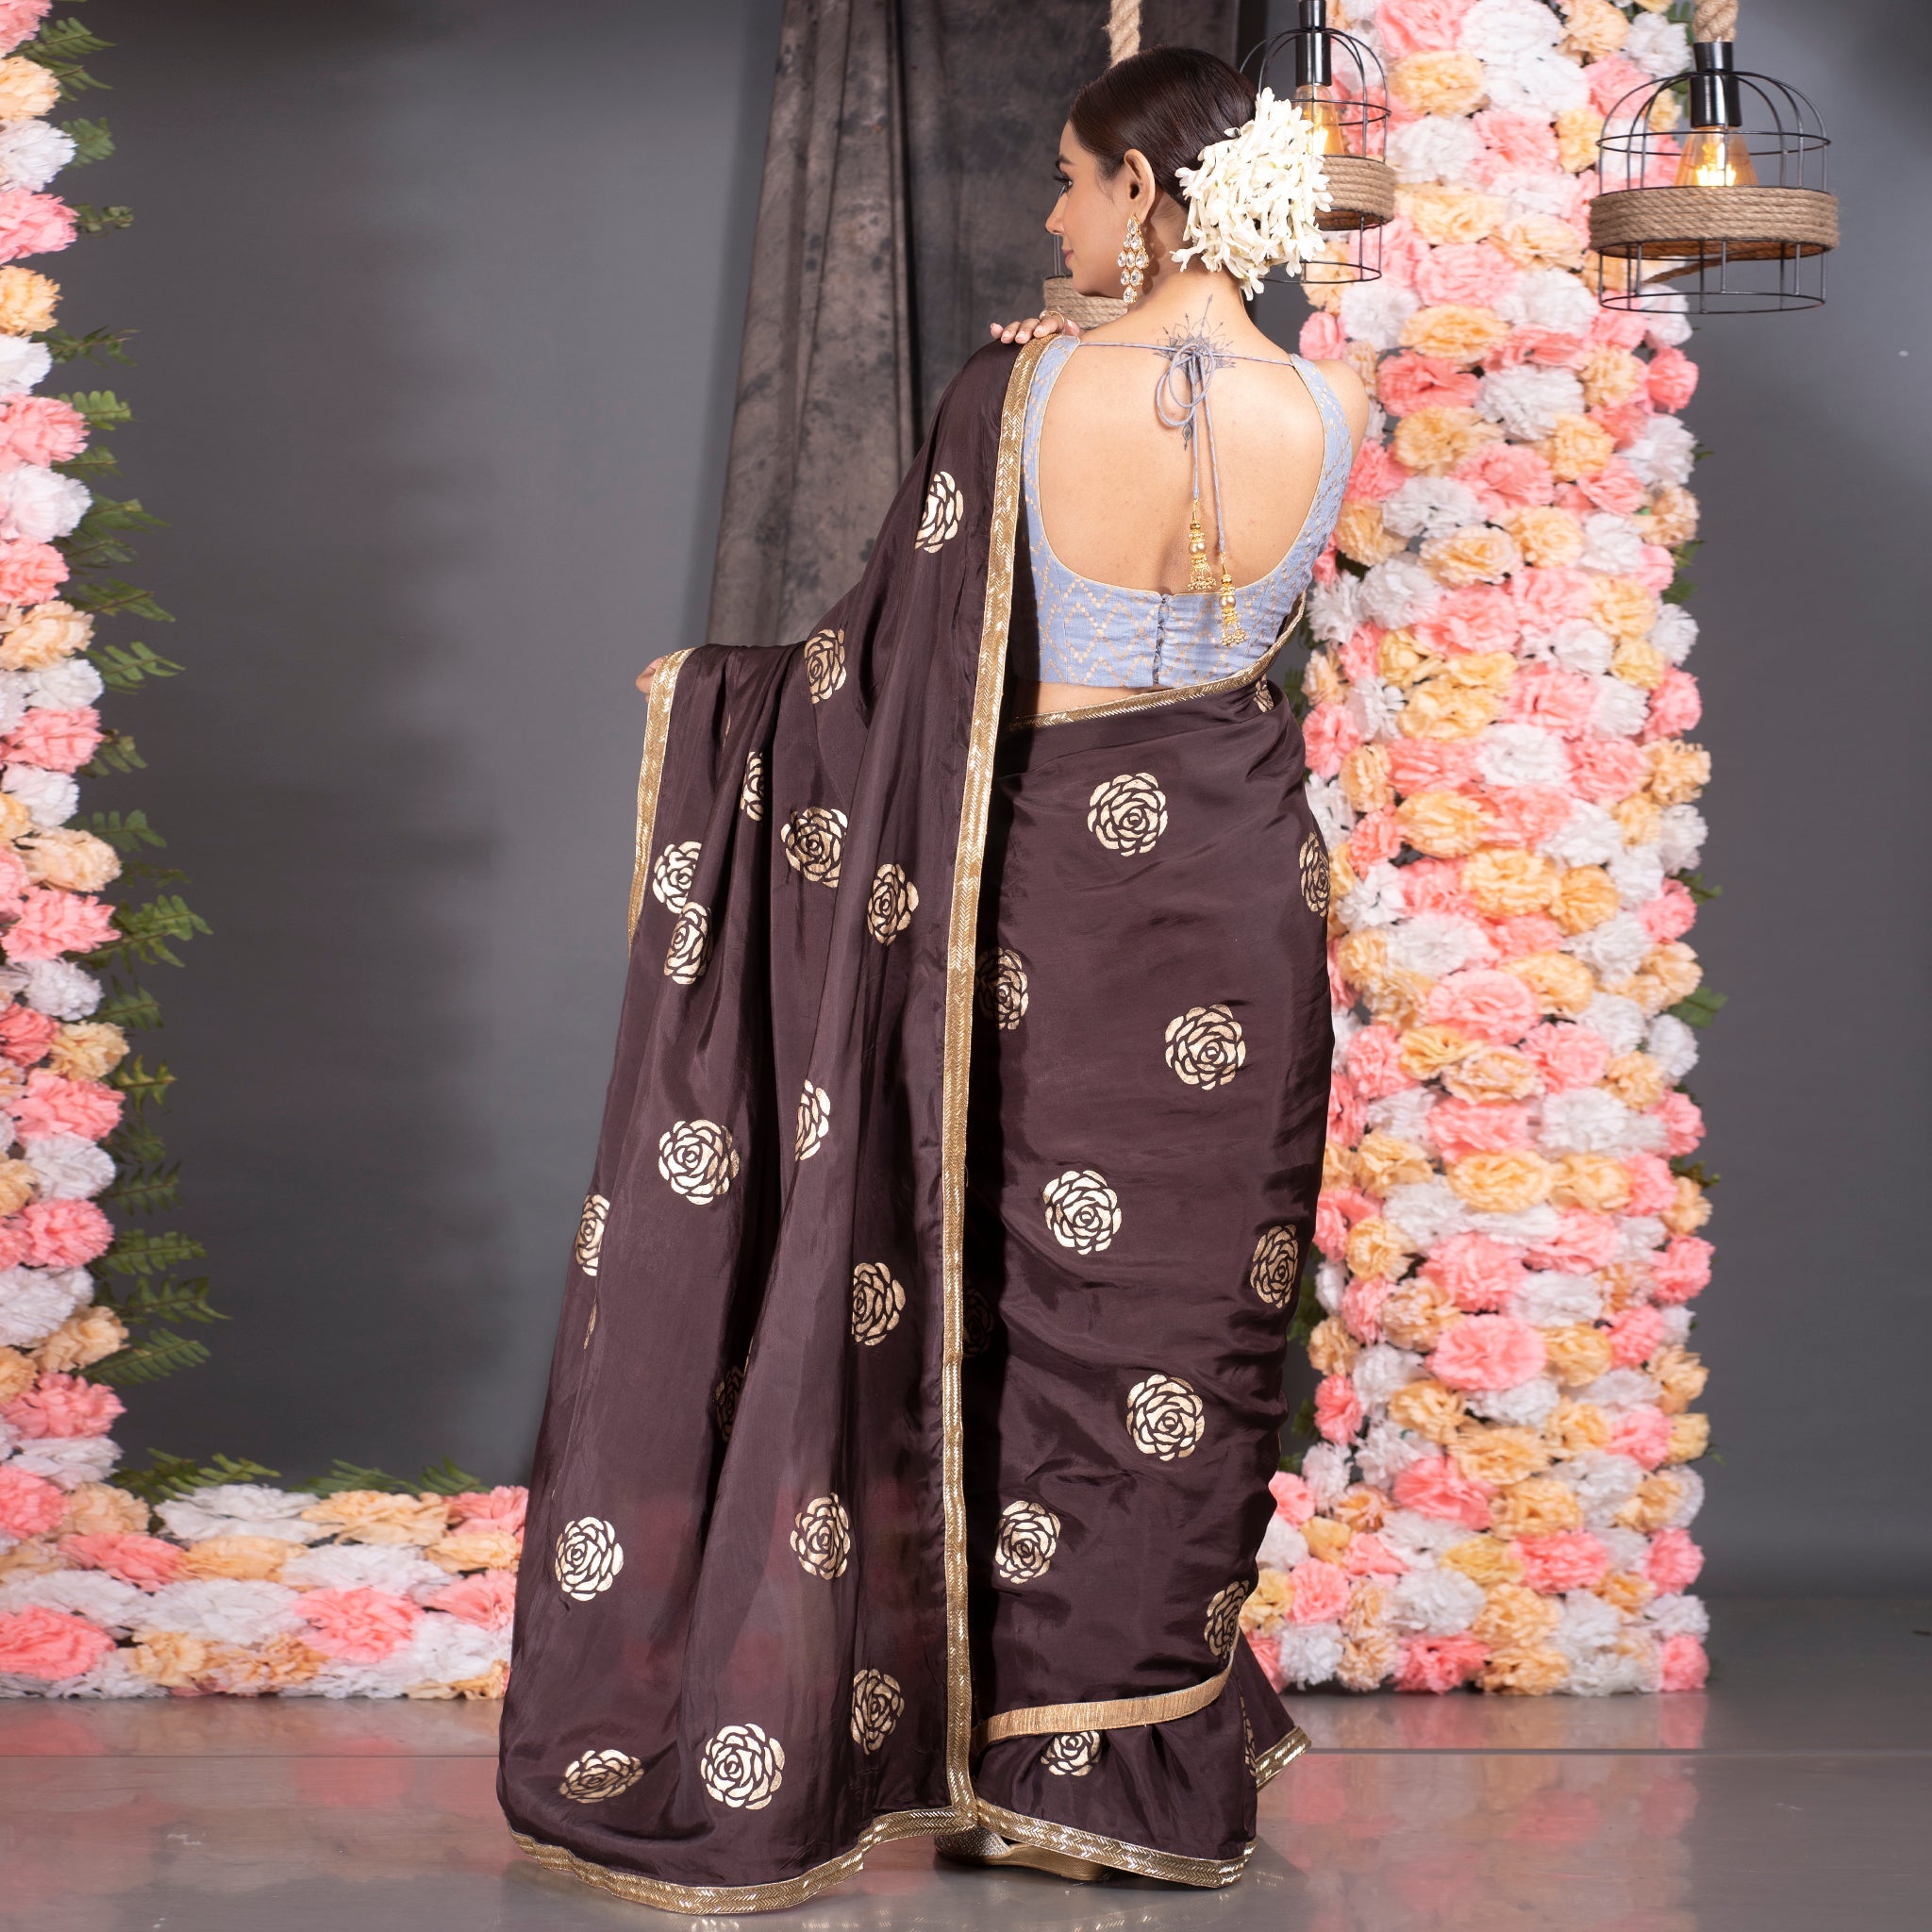 Women's Chocolate Brown Habutai Silk Saree With Gold Print And Hand Embroidered Lace Border - Boveee